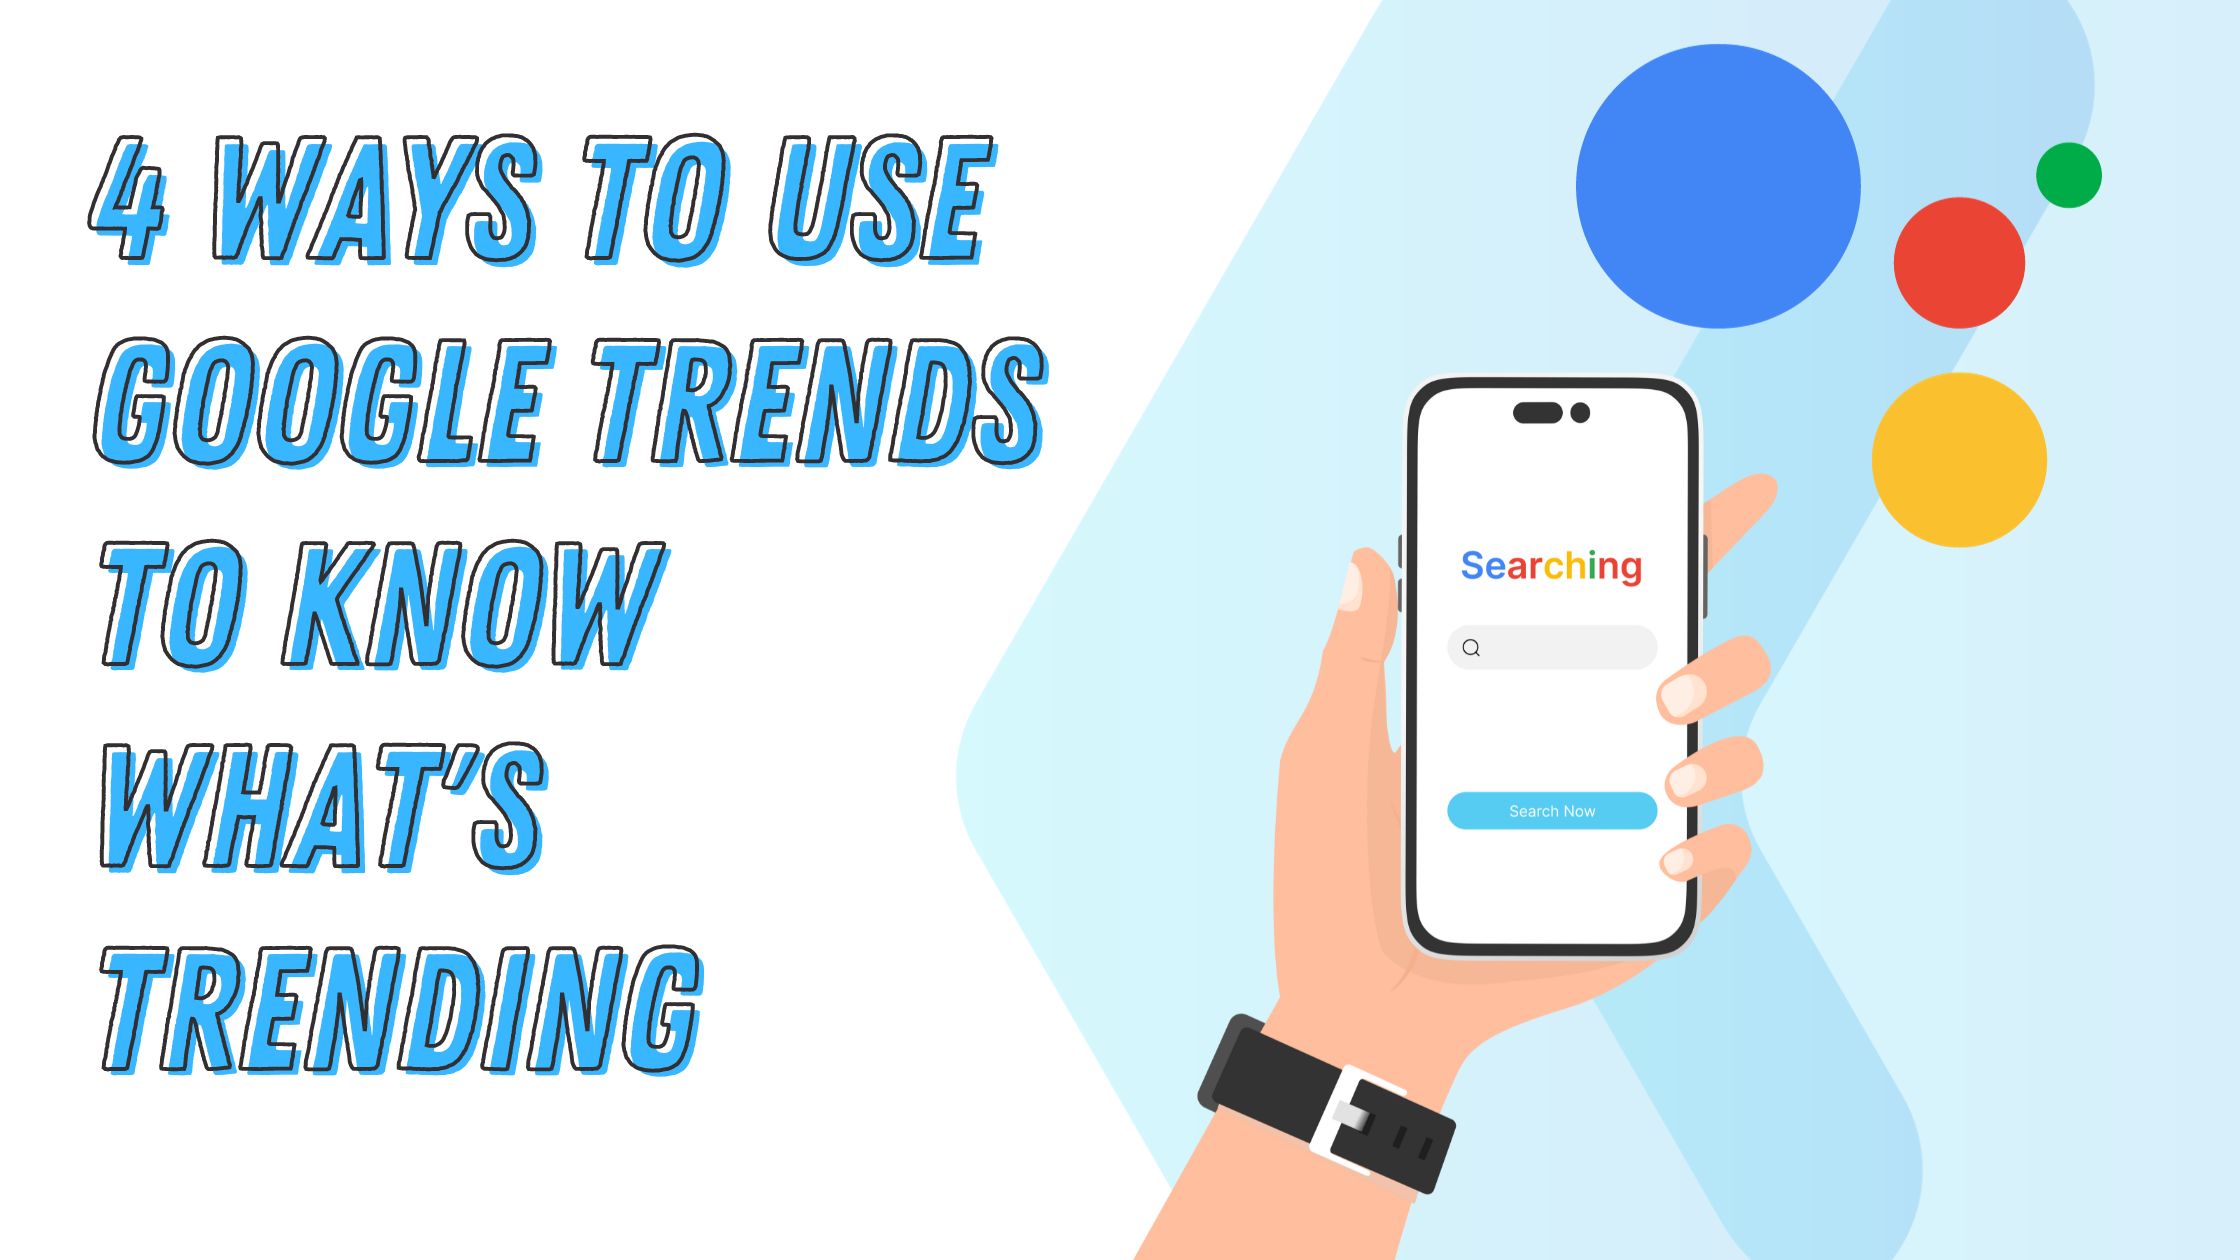 4 ways to use Google Trends to know what’s trending